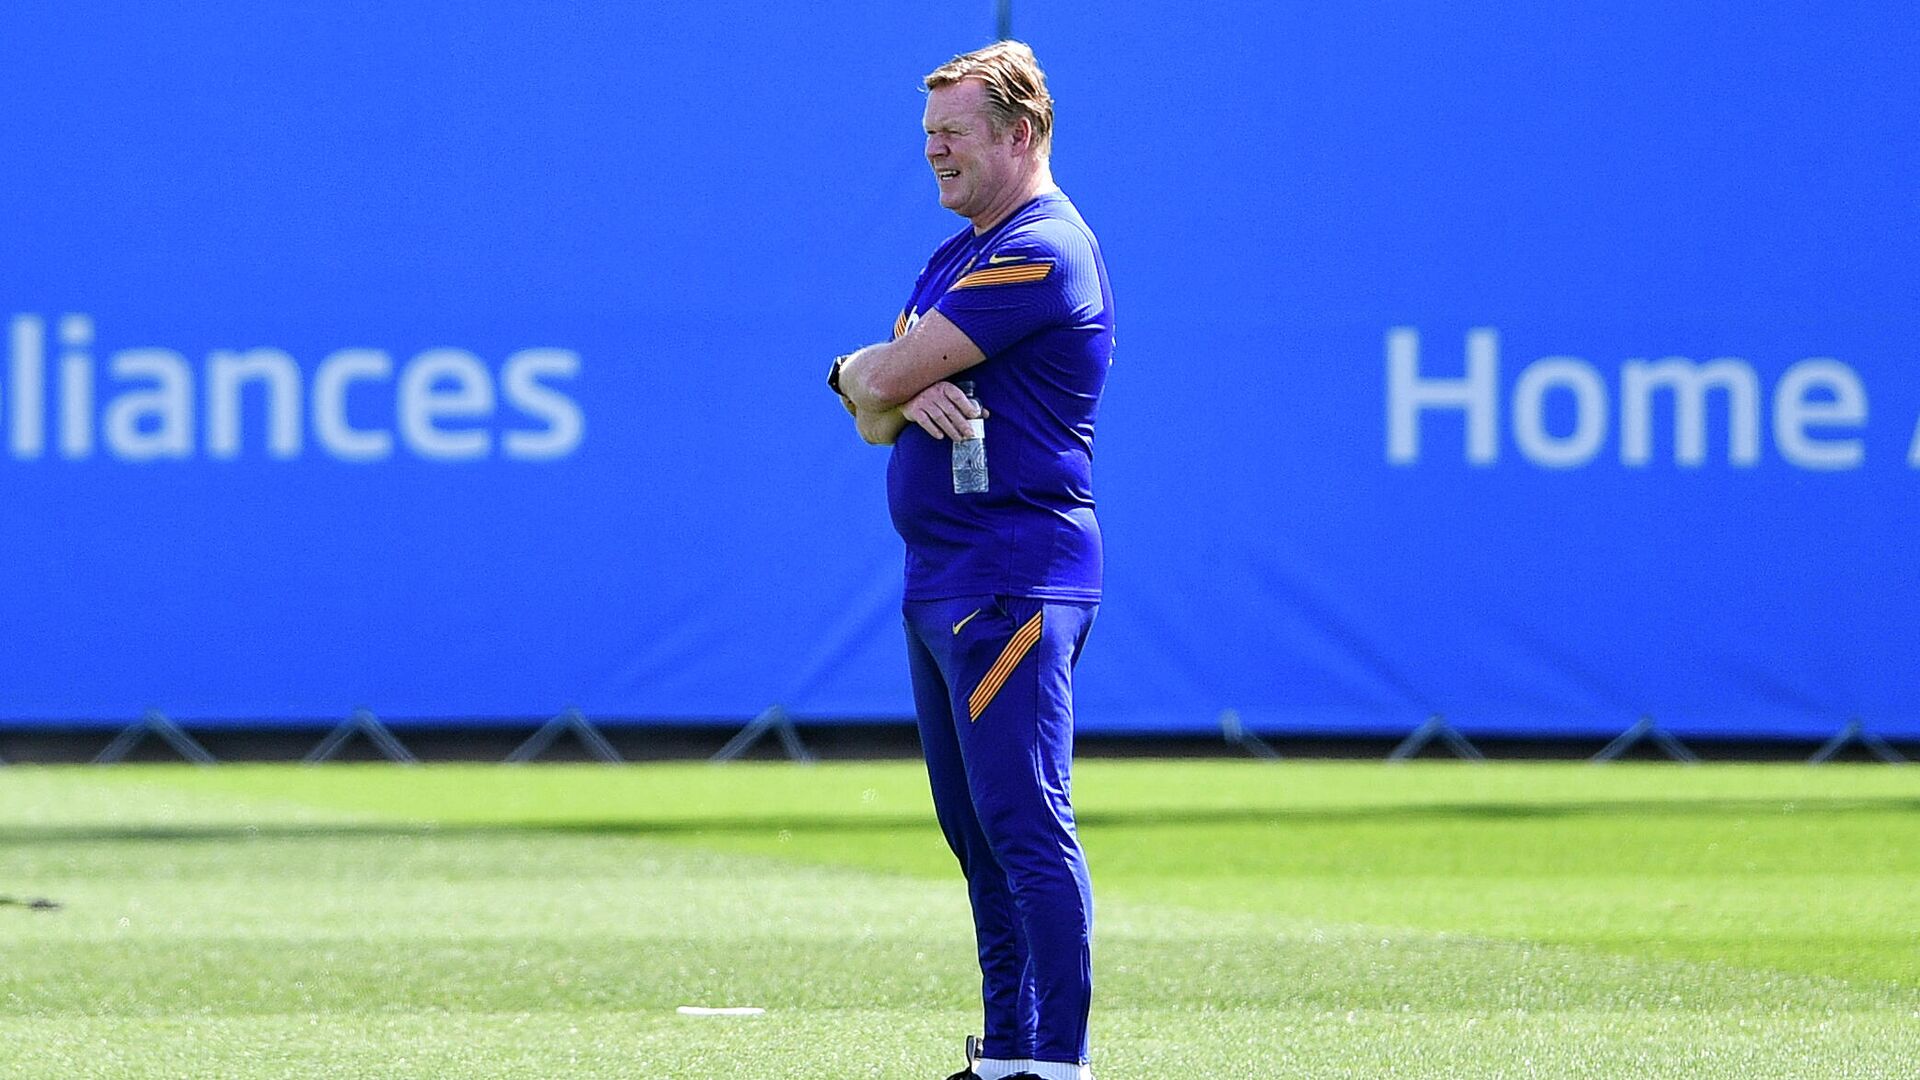 Barcelona's Dutch coach Ronald Koeman attends a training session at the Joan Gamper Sports City training facilities in Sant Joan Despi on May 21, 2021. (Photo by Pau BARRENA / AFP) - РИА Новости, 1920, 22.05.2021